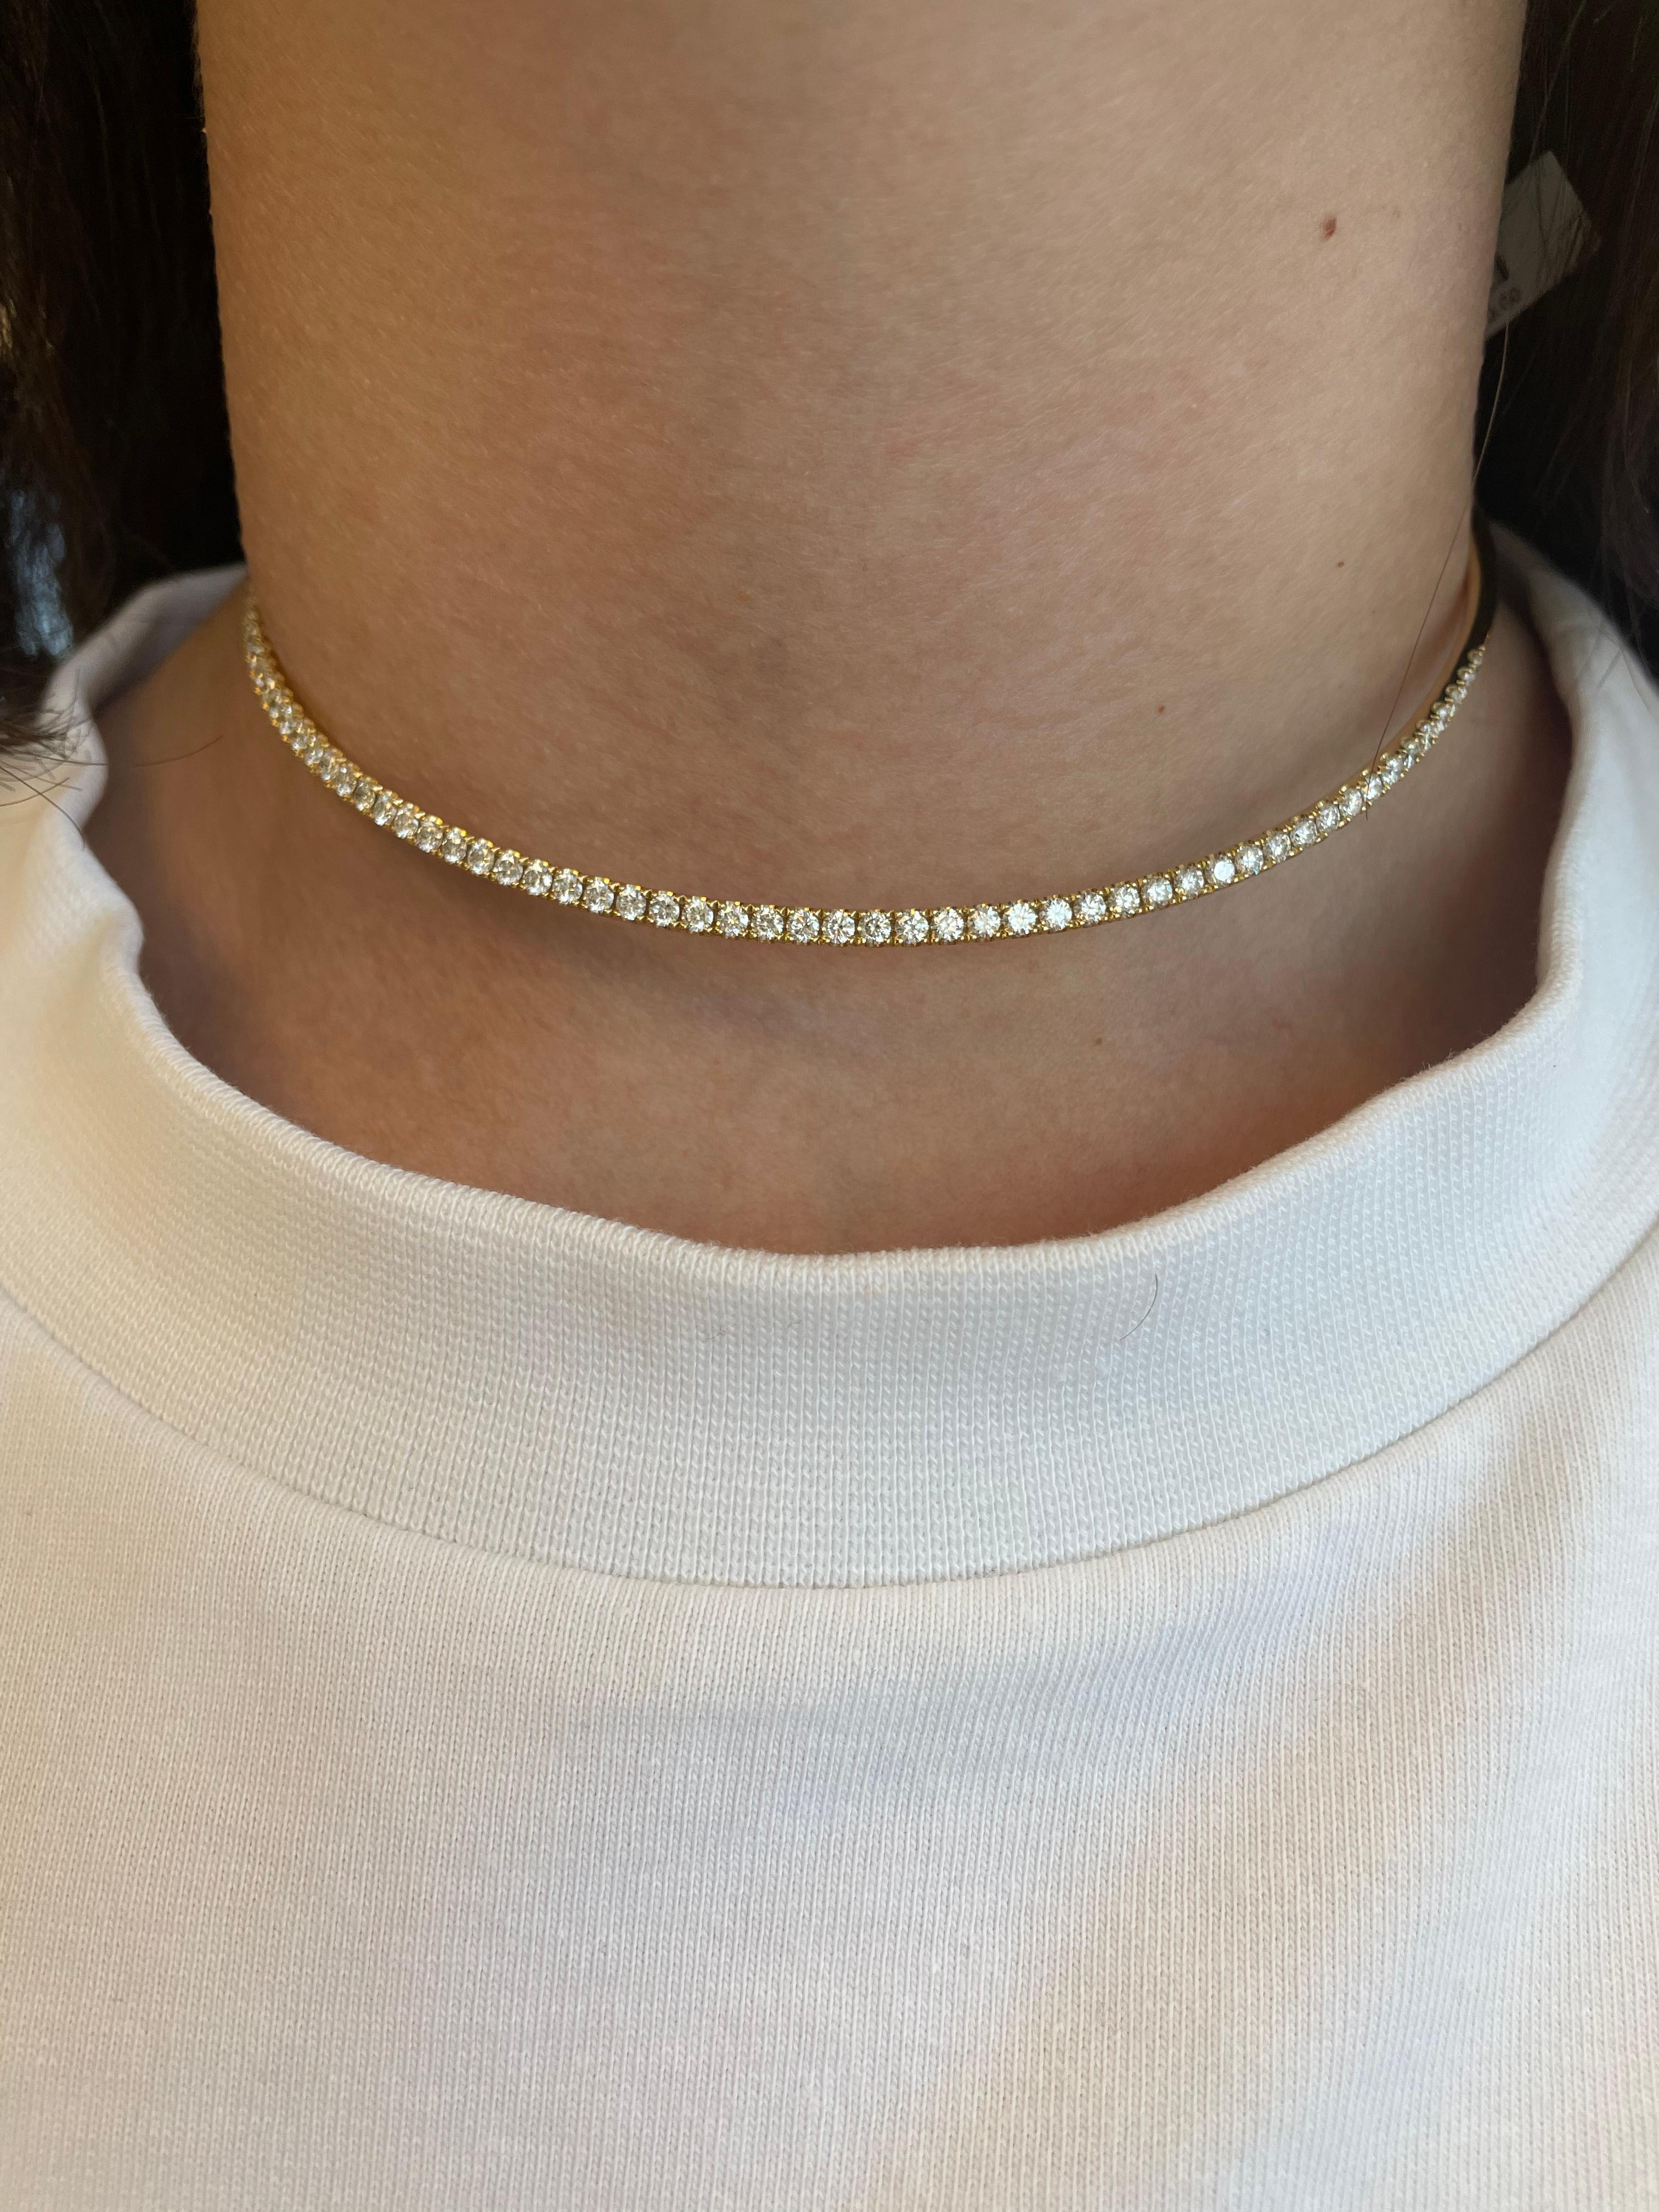 Beautiful modern diamond tennis choker, flexible open back. Created by Alexander Beverly Hills.
63 round brilliant diamonds, 3.46 carats. Approximately G/H color grade and VS2/SI1 clarity grade. 18-karat yellow gold, 27.36 grams. 
Accommodated with